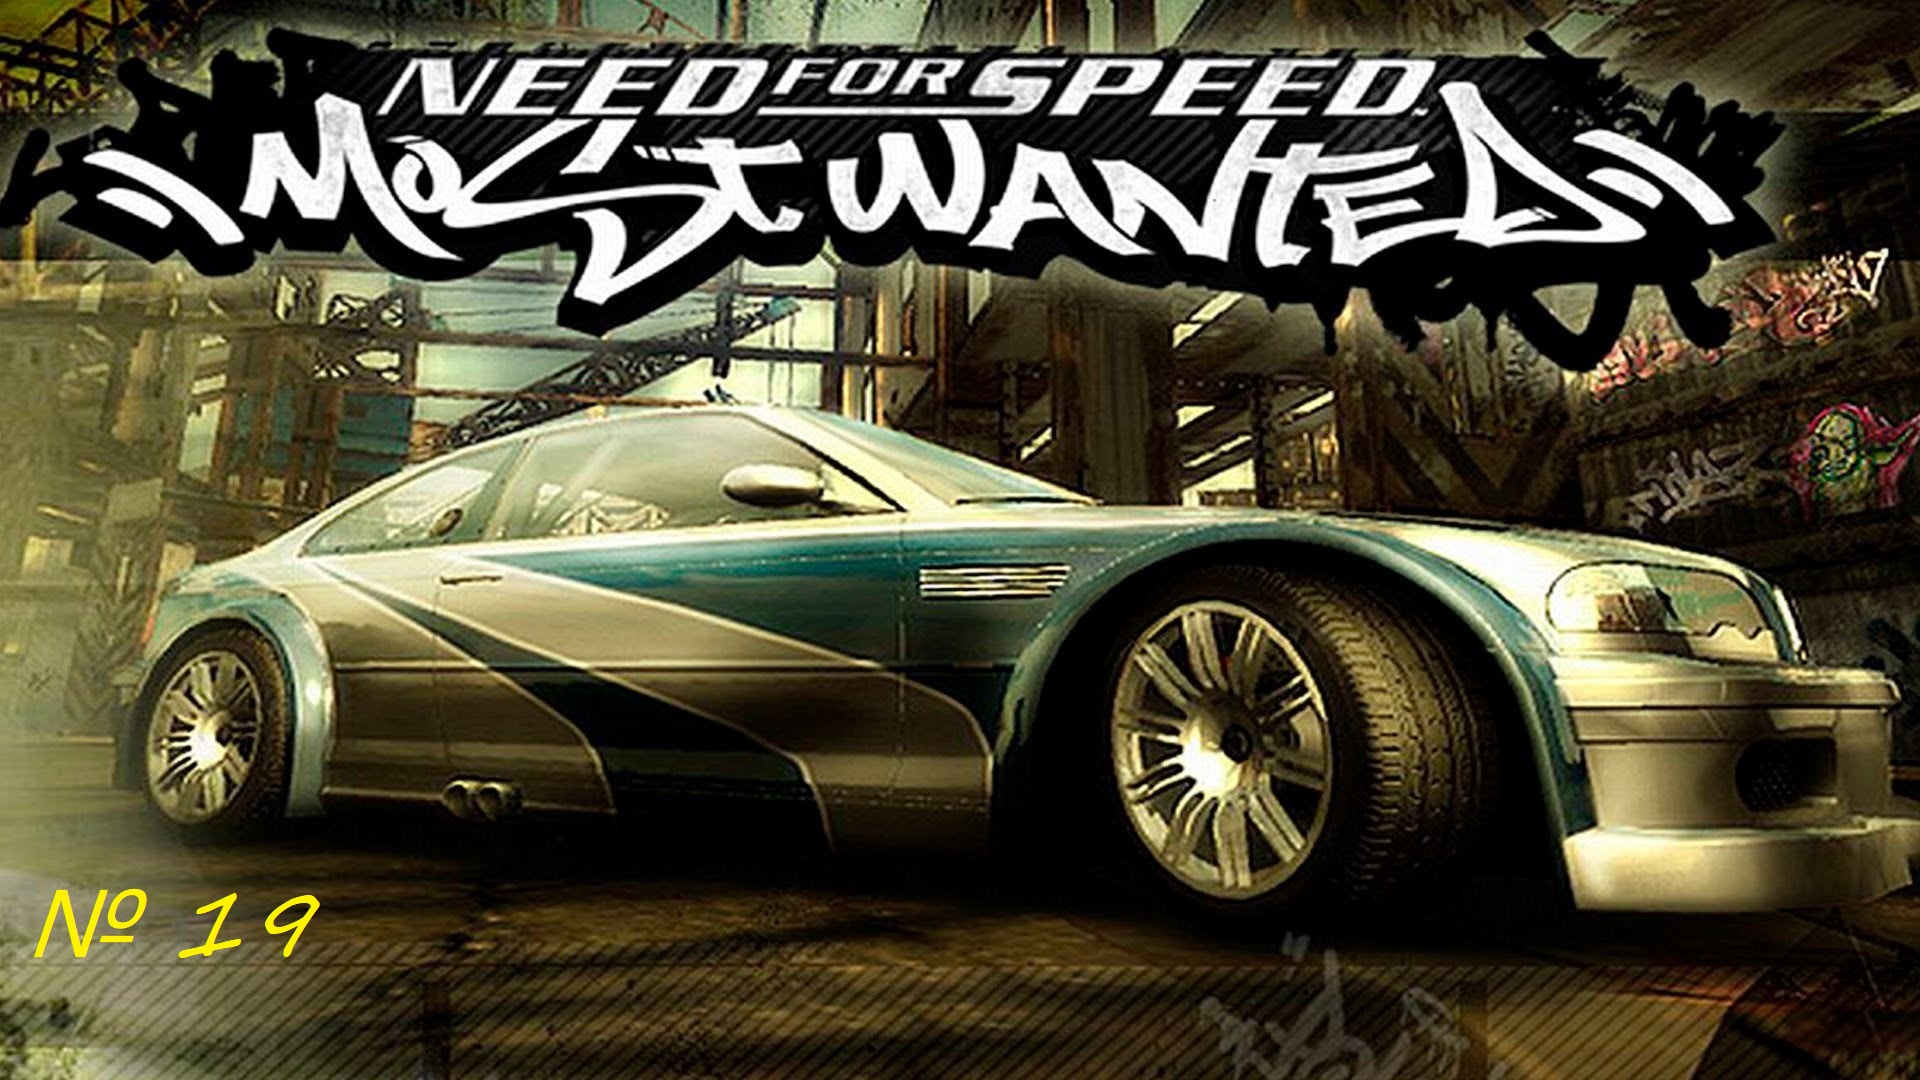 Nfs most wanted 2005 стим